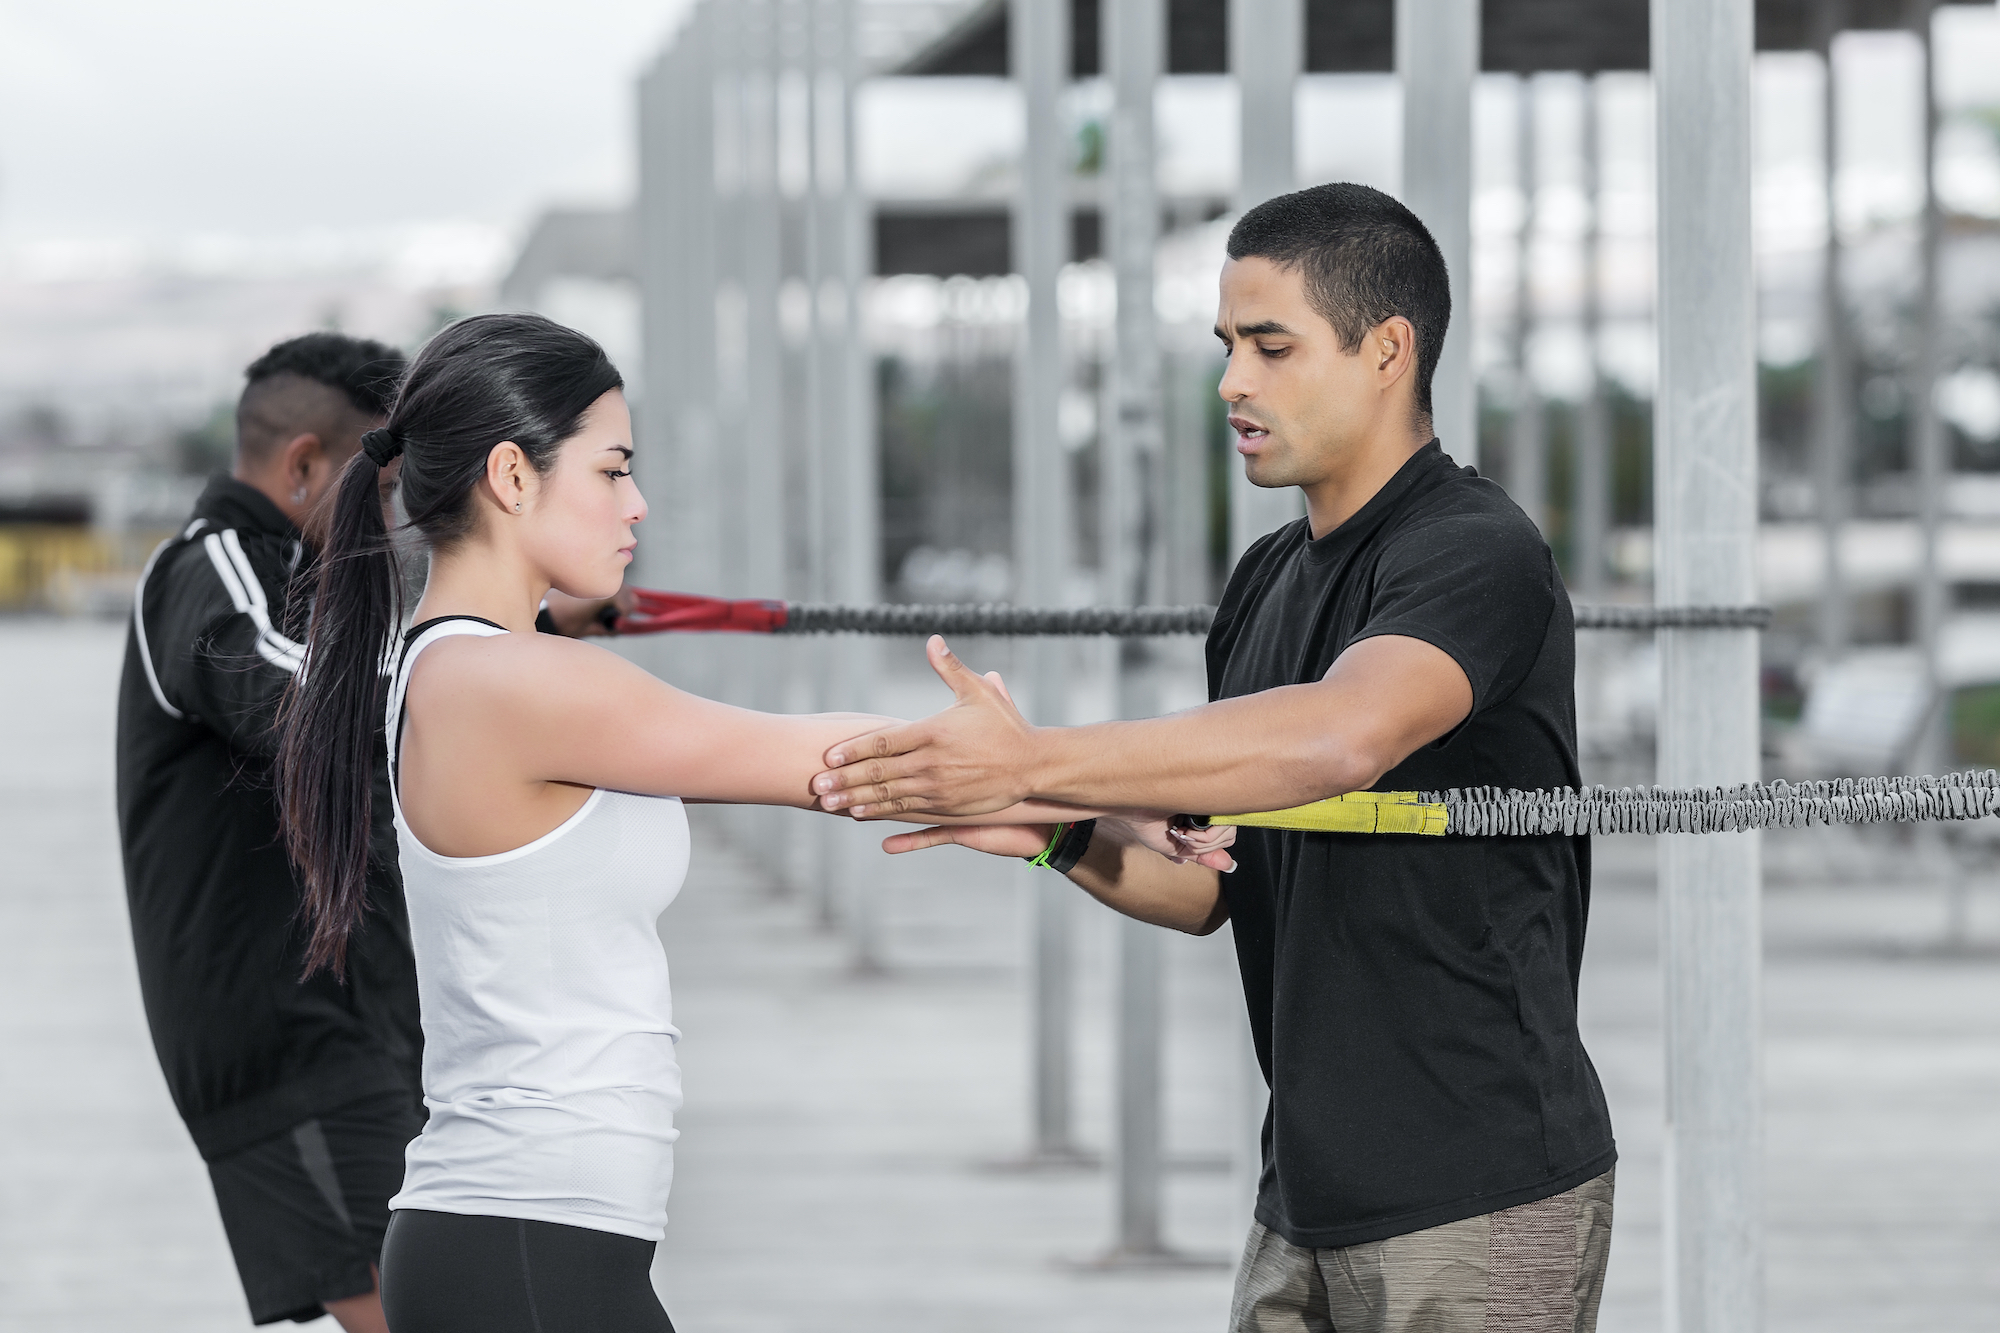 female training client being guided by male personal trainer